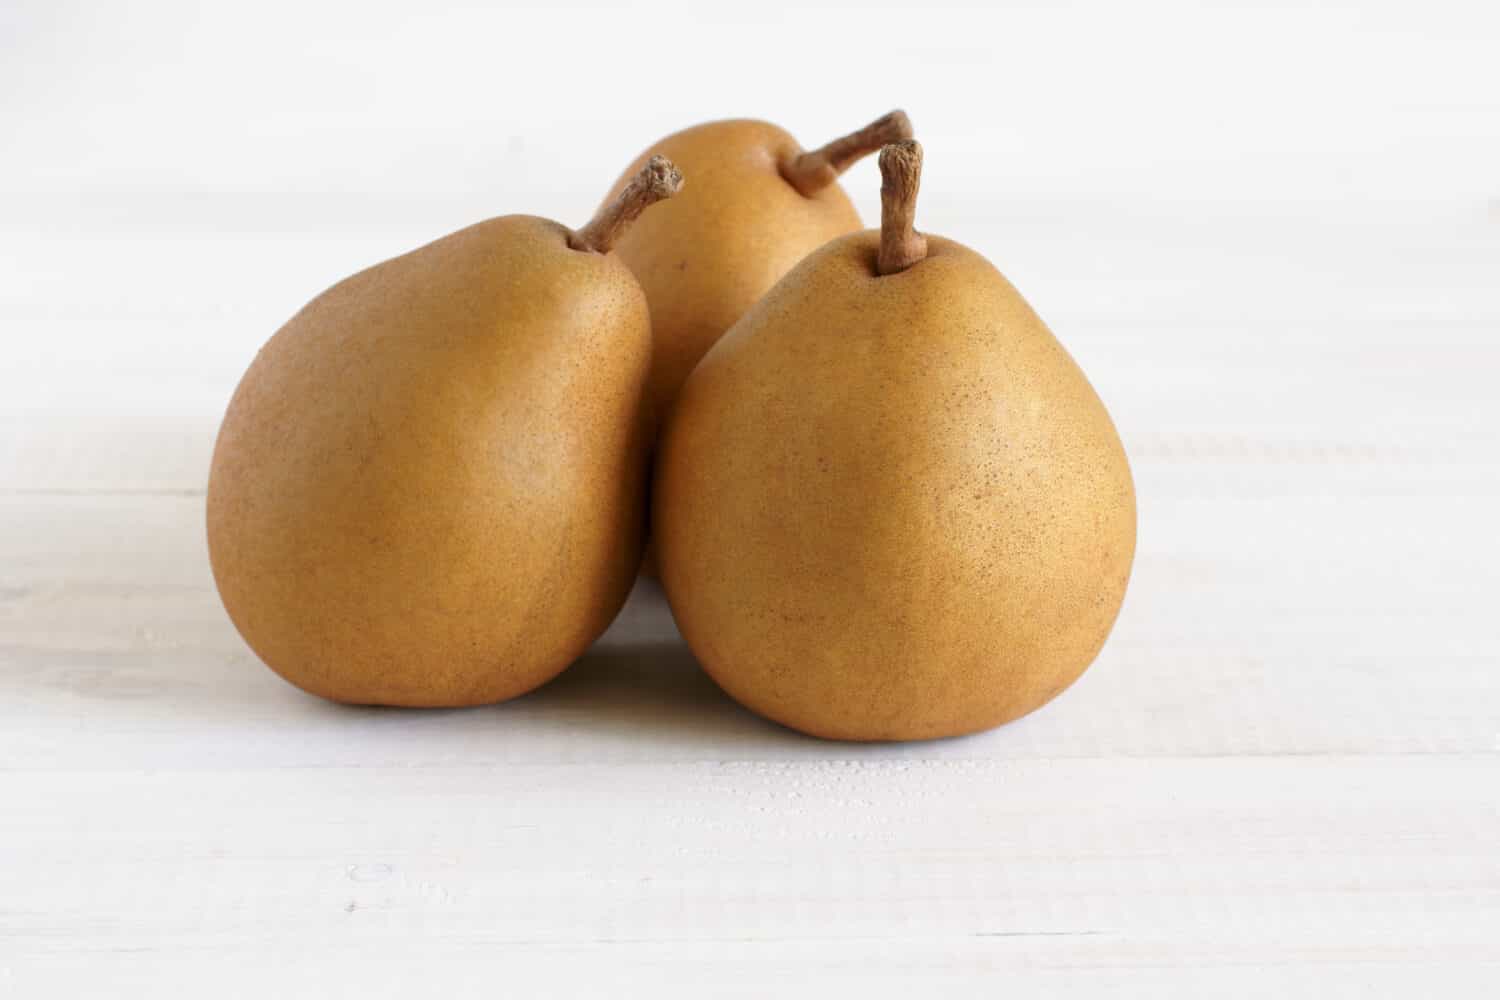 Taylor's gold a New Zealand pear variety related to the Comice pear